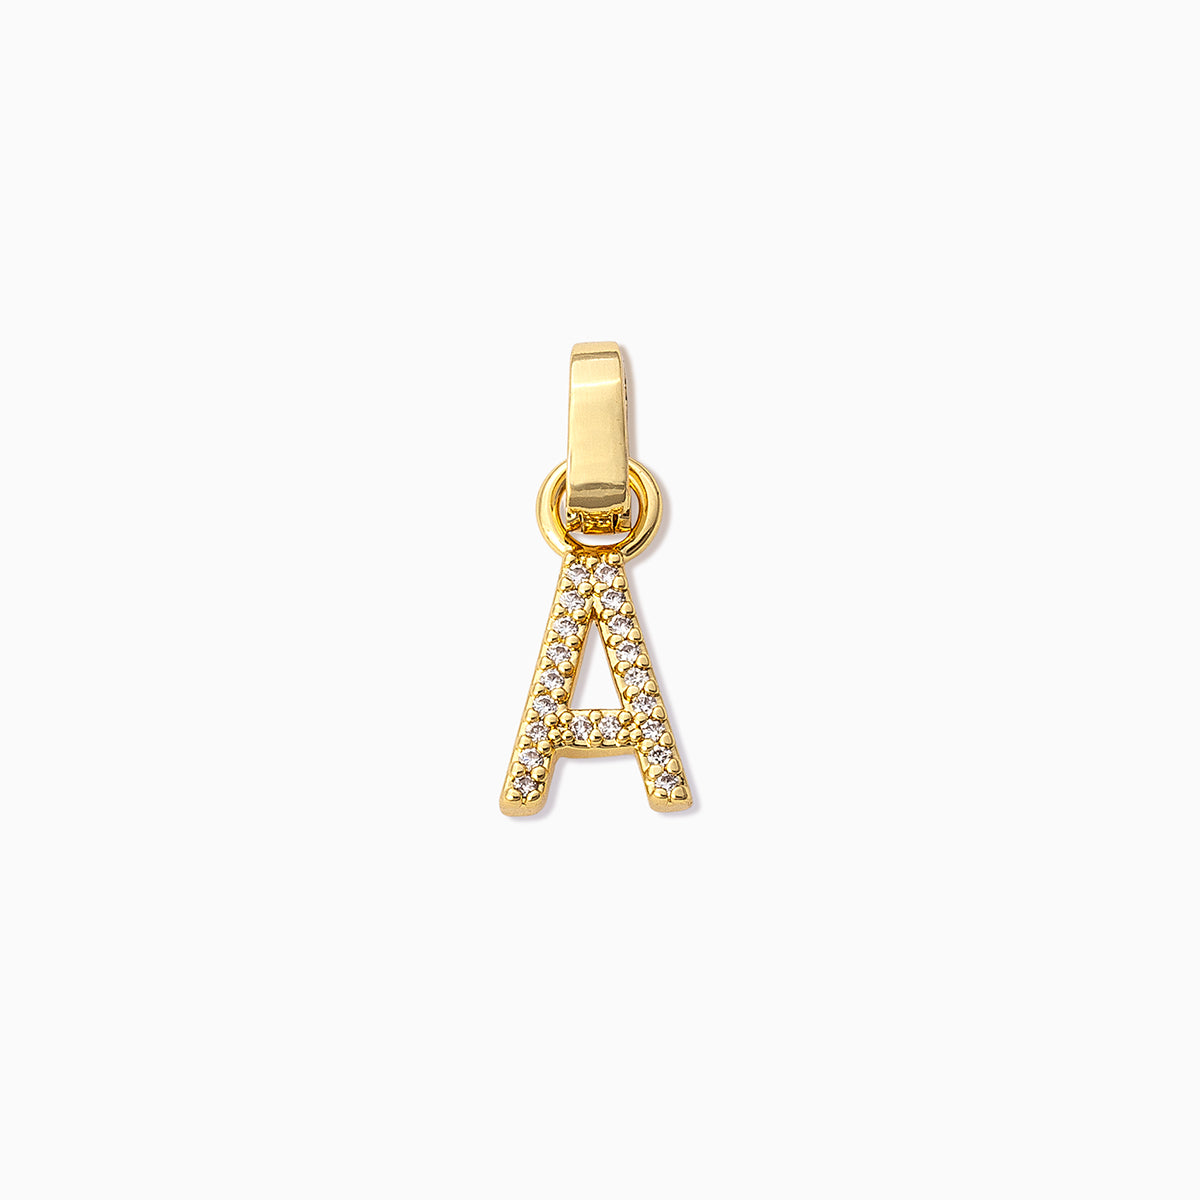 letter Charm cz Charms for Jewelry Making Supplies 26 Letter